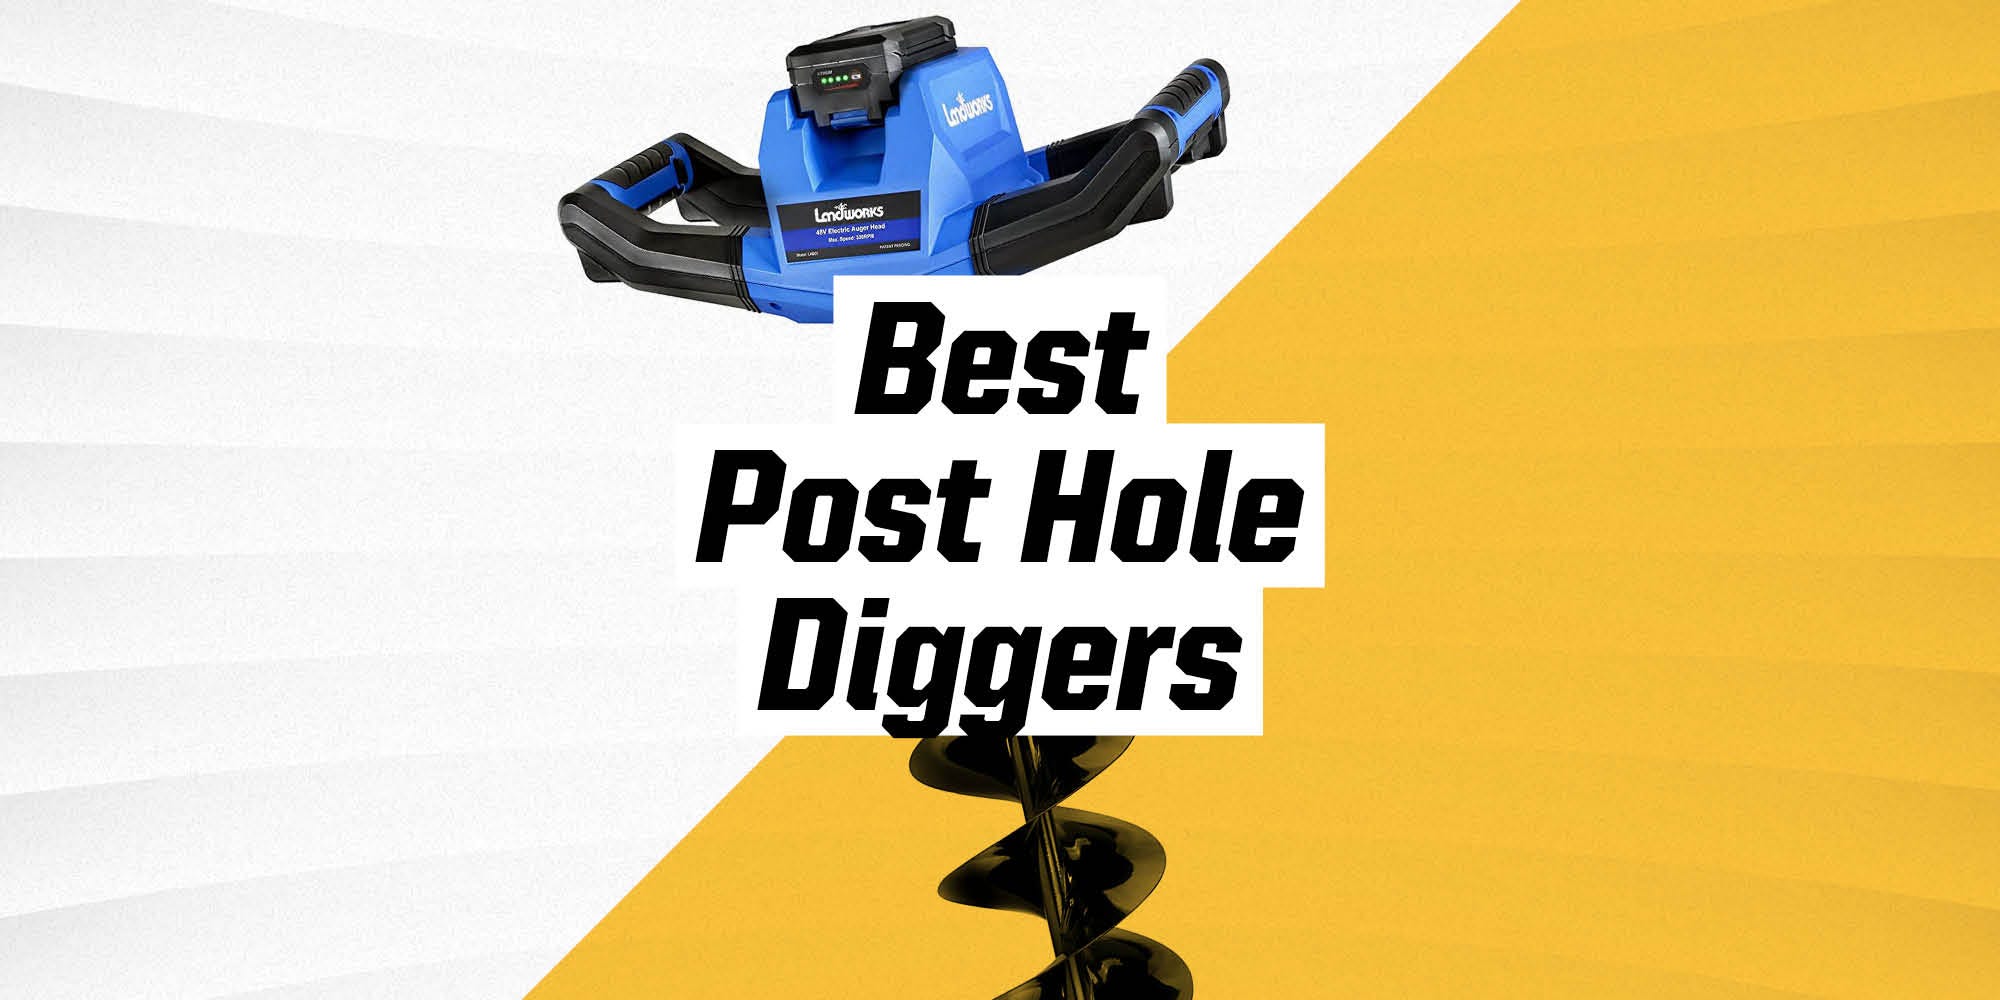 The Best Post Hole Diggers for Home DIY Projects